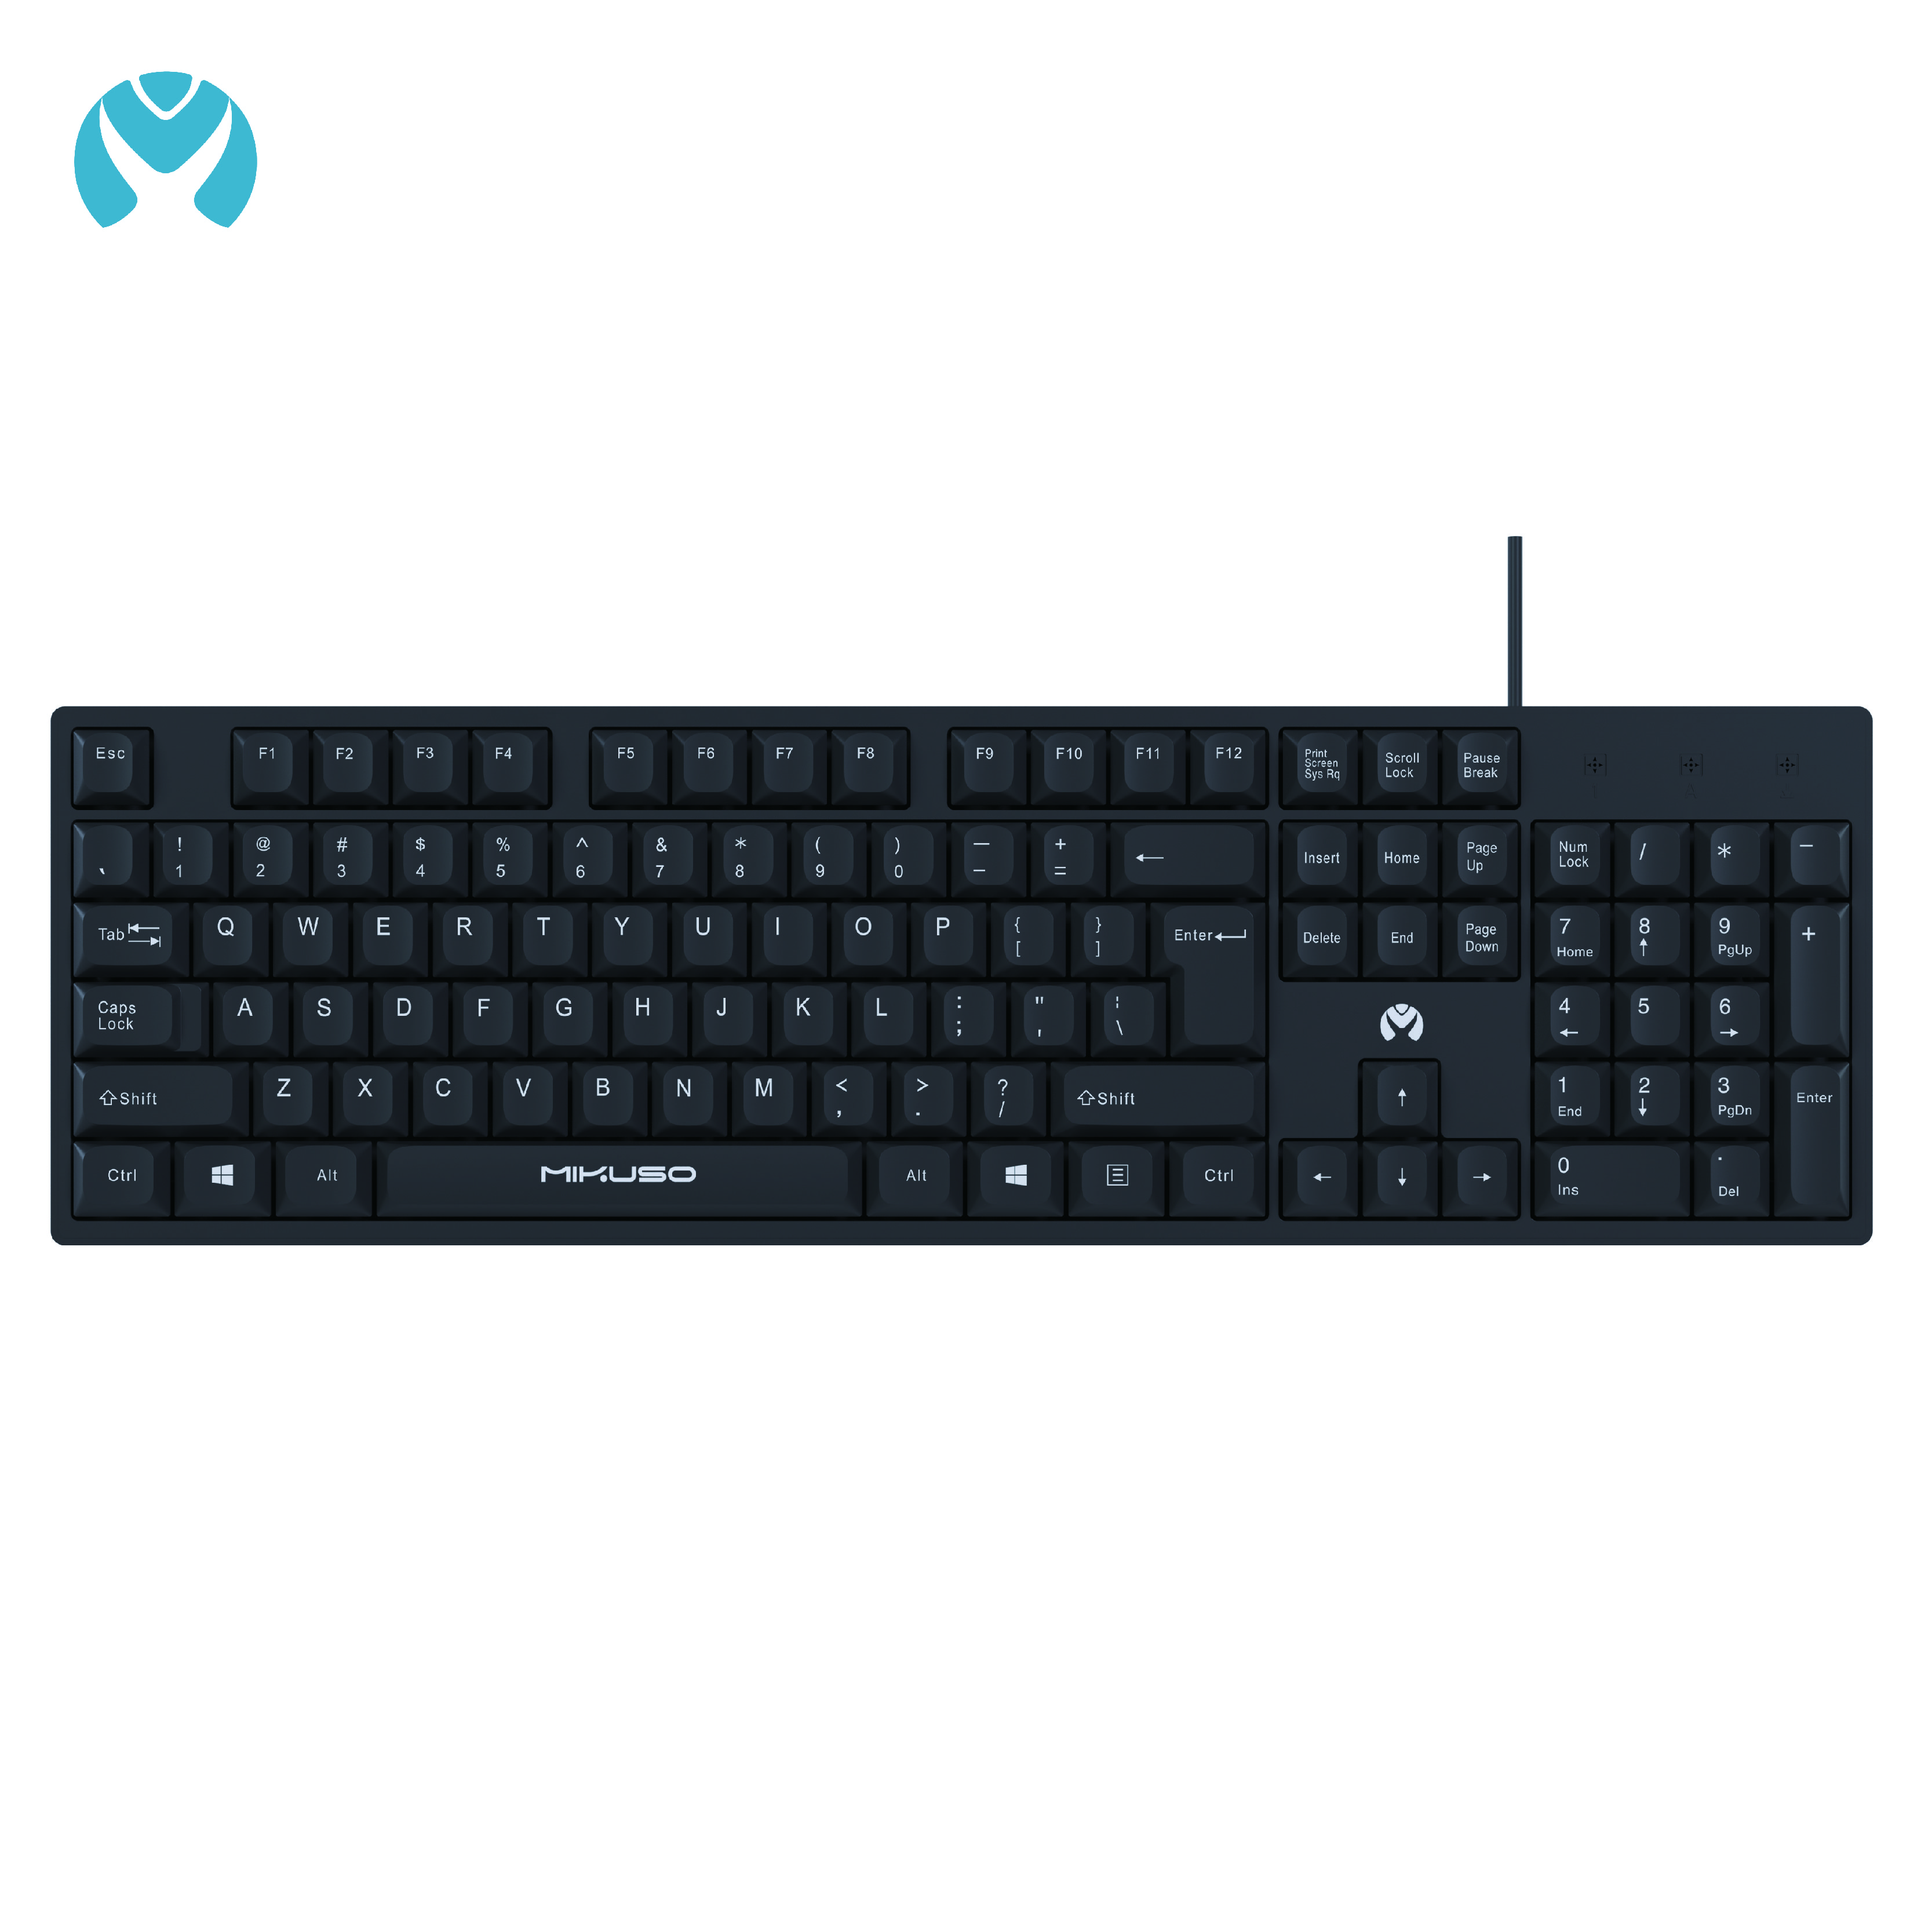 KB101 | Office wired keybaord